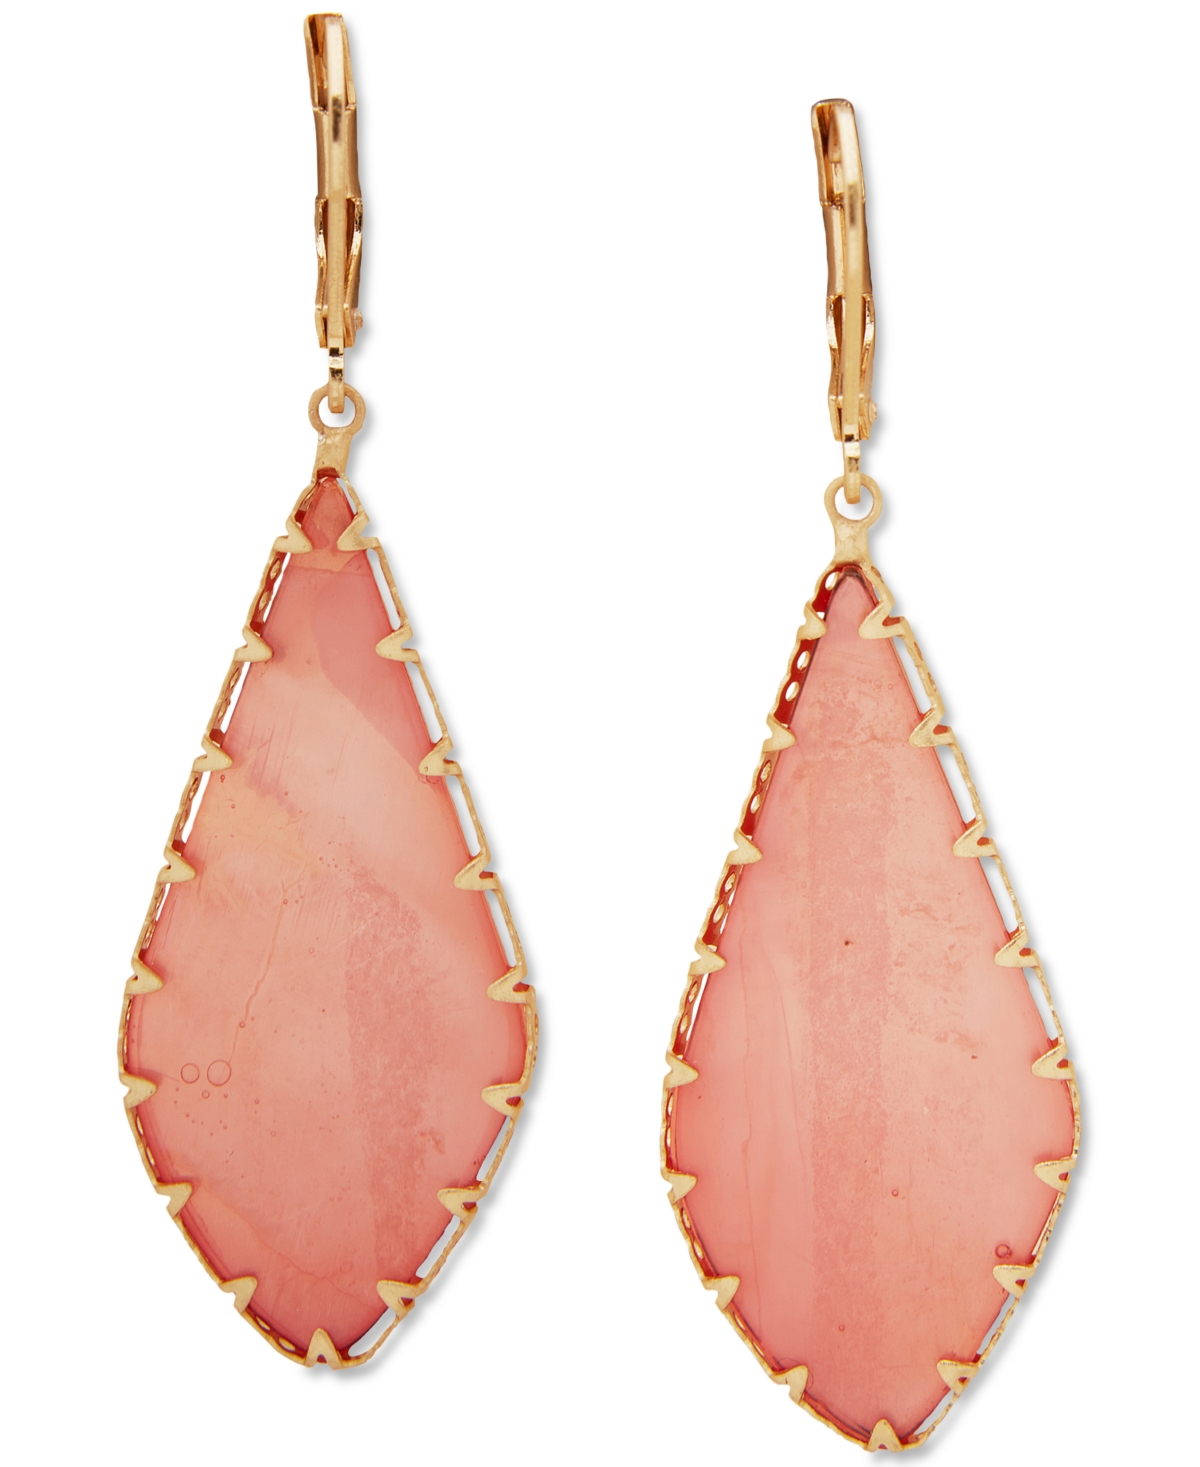 Gold-Tone Large Flat Stone Drop Earrings - Coral